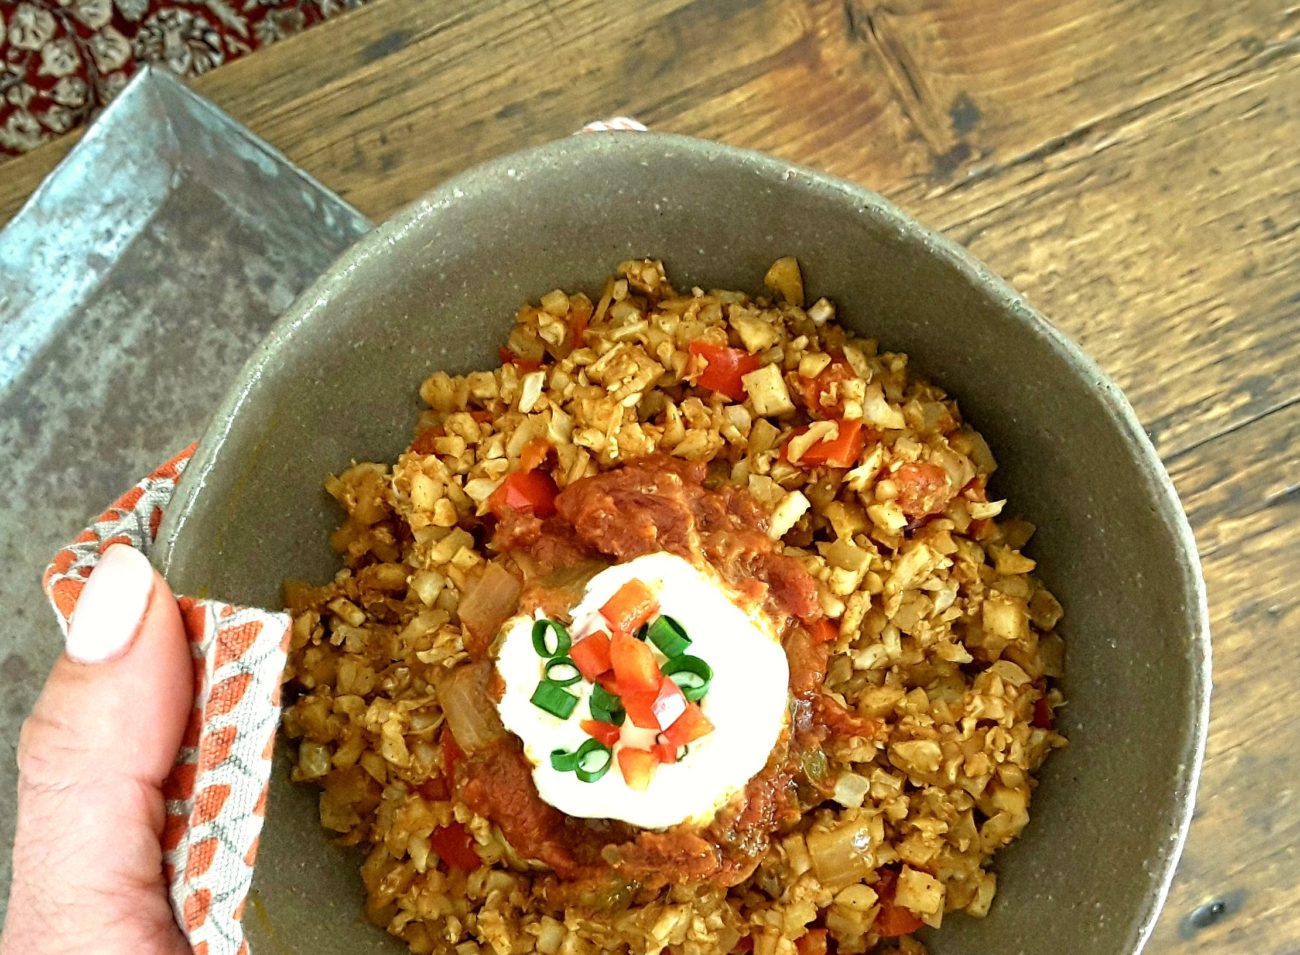 Low Carb Mexican Cauliflower Rice